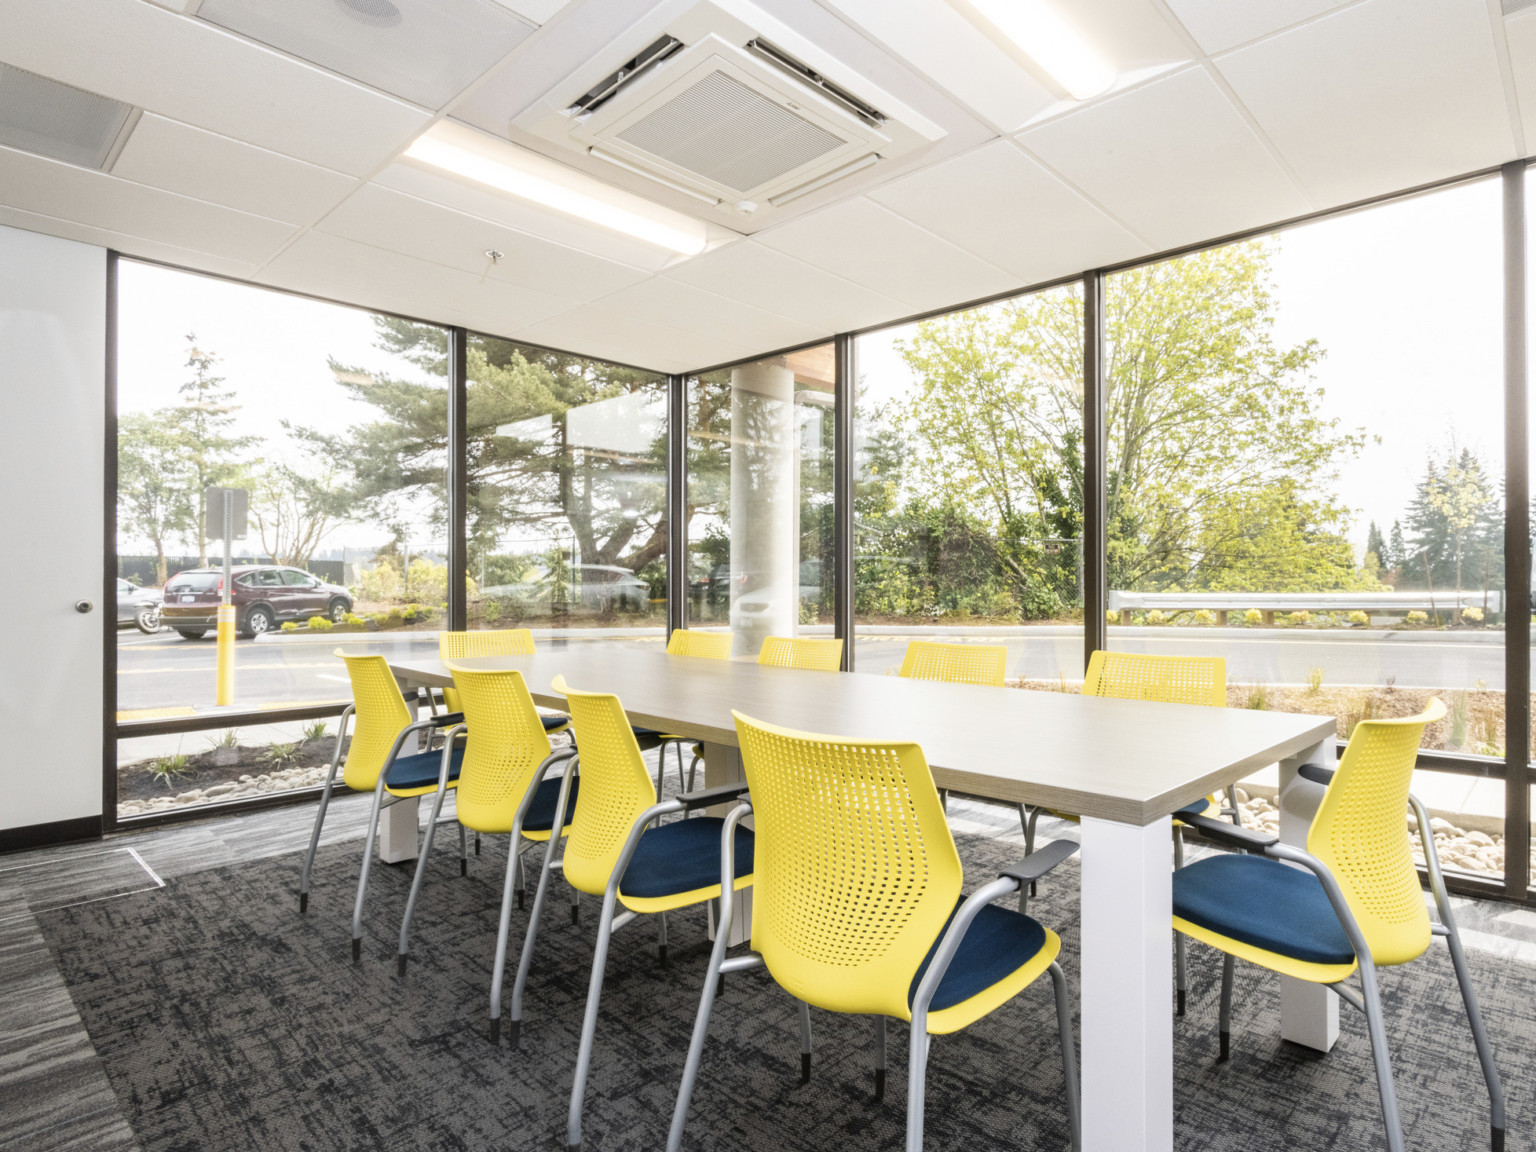 corner conference room with floor to ceiling glass gray carpet gray LVT floors white walls and ceiling and yellow chairs